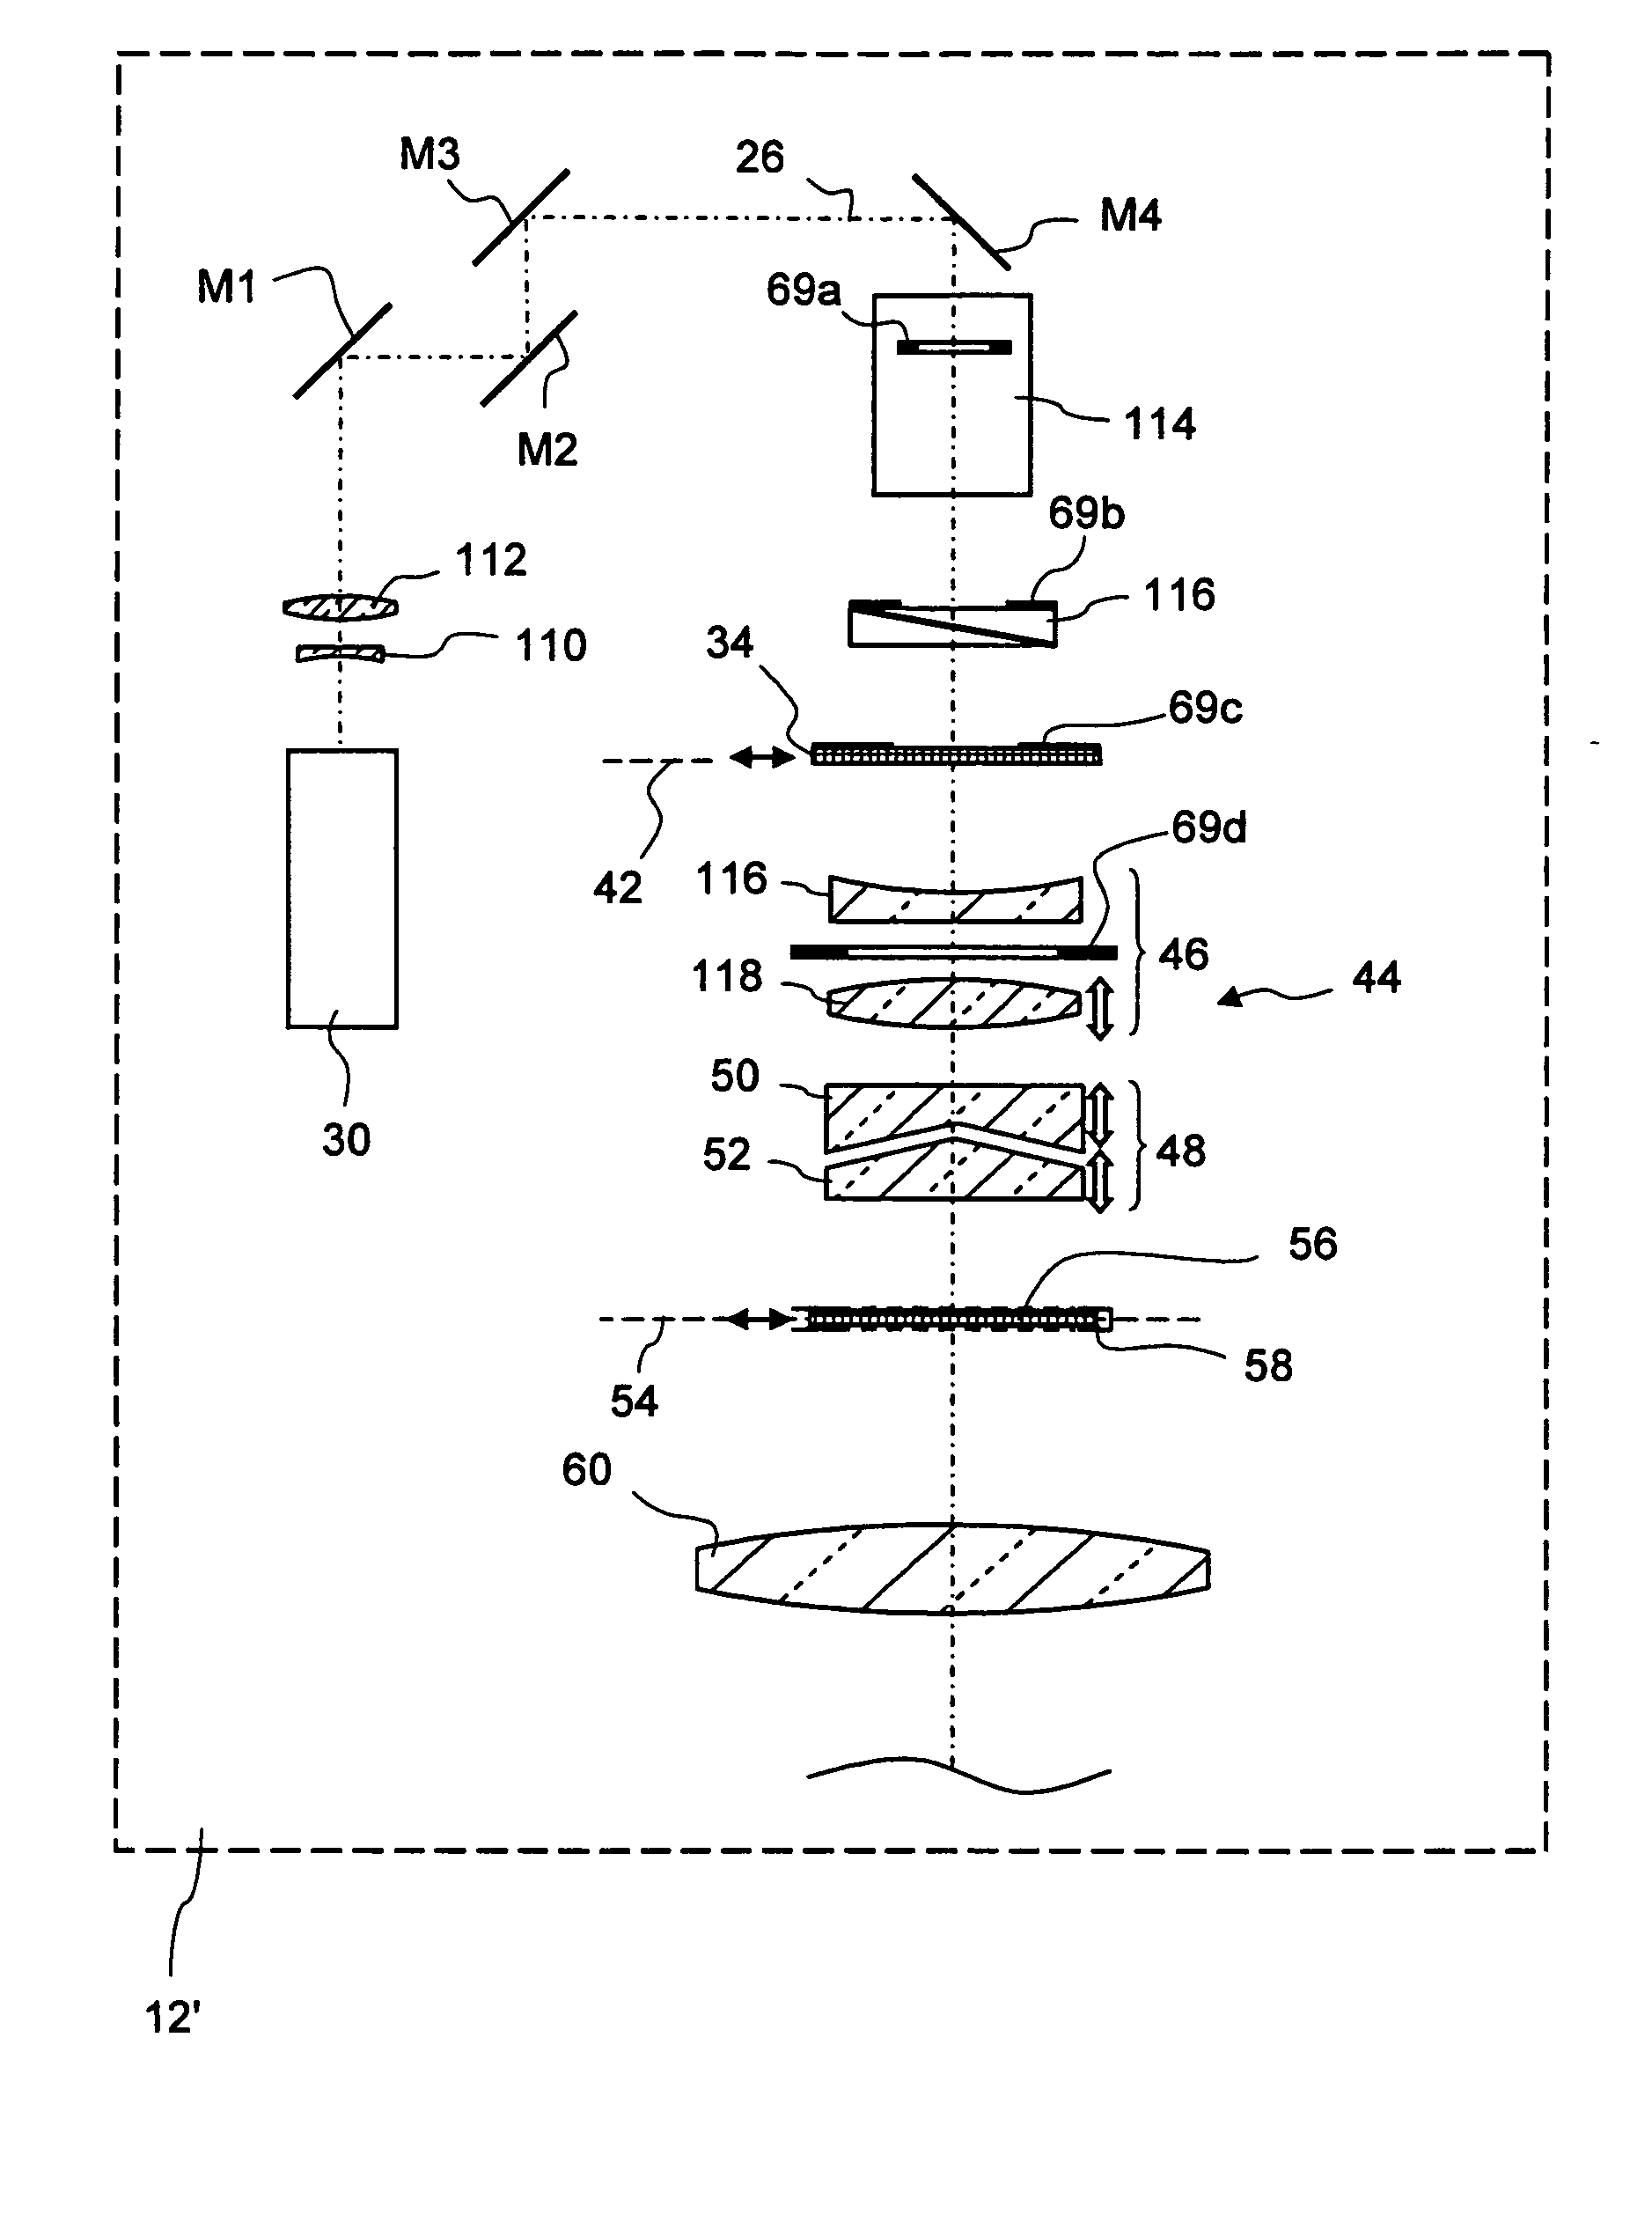 Illumination System for a Microlithgraphic Exposure Apparatus